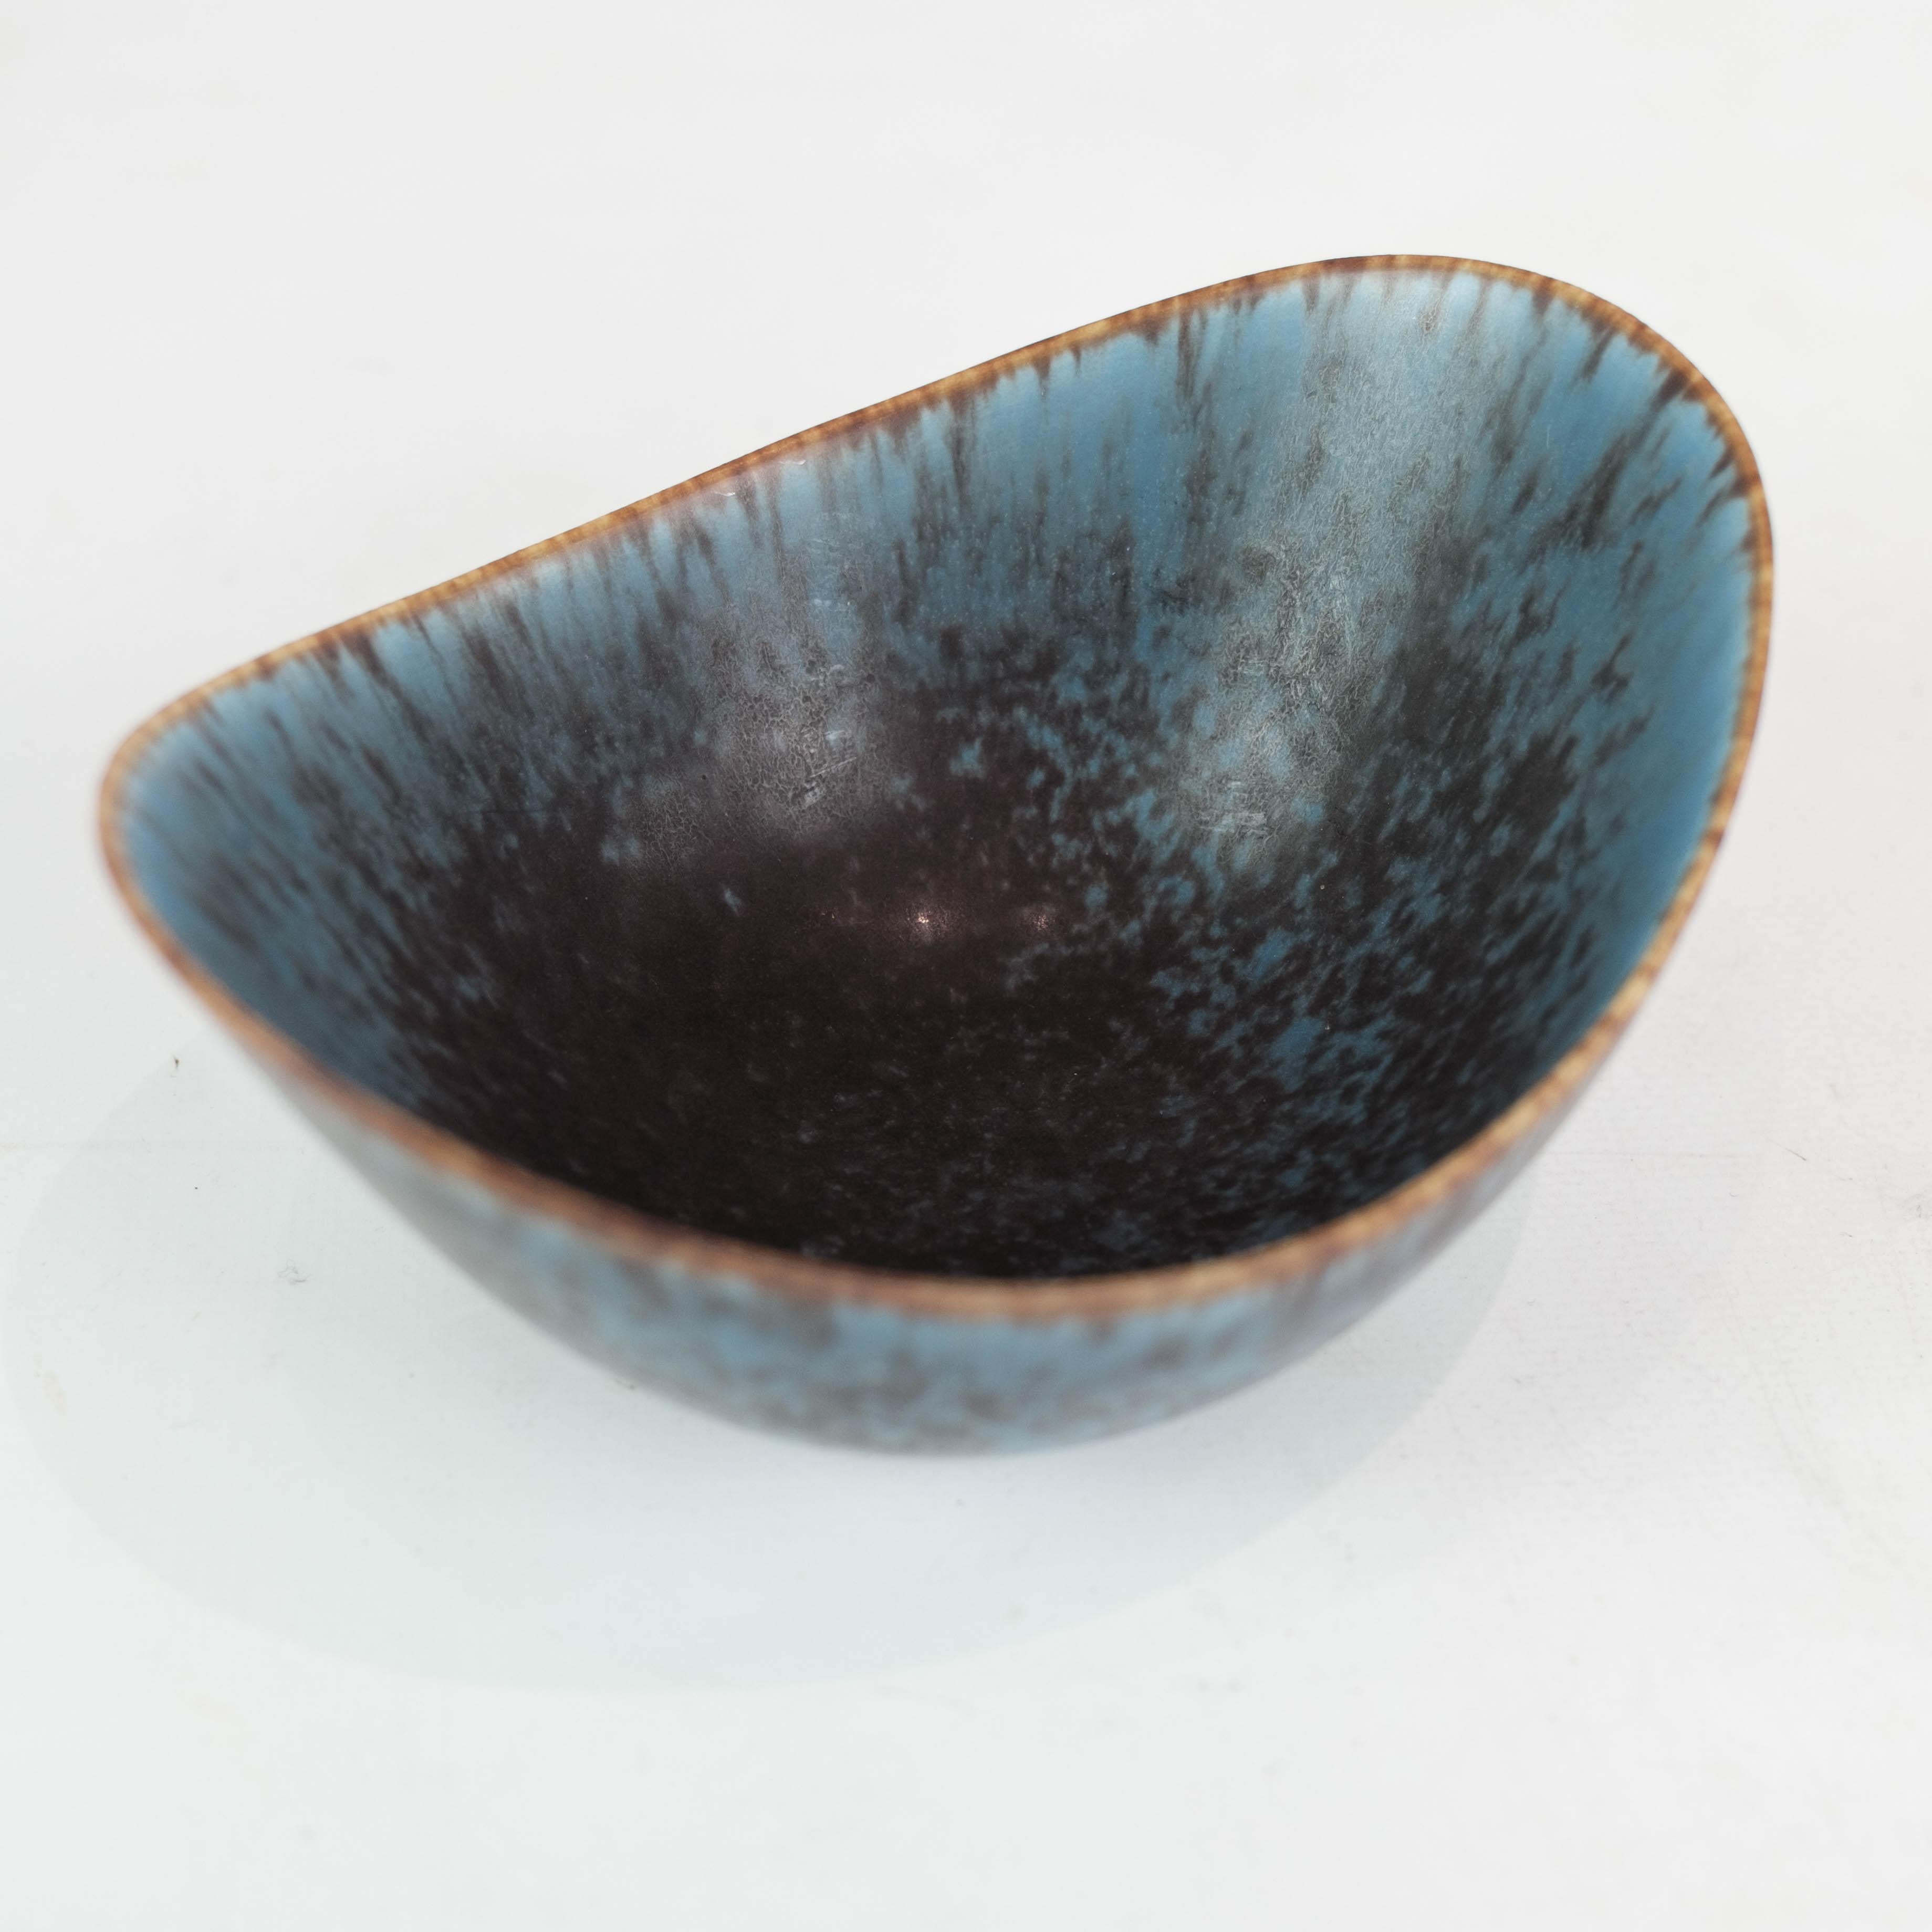 Swedish Ceramic Bowl with Blue and Brown Glace by the Artist Gunnar Nylund for Rørstrand